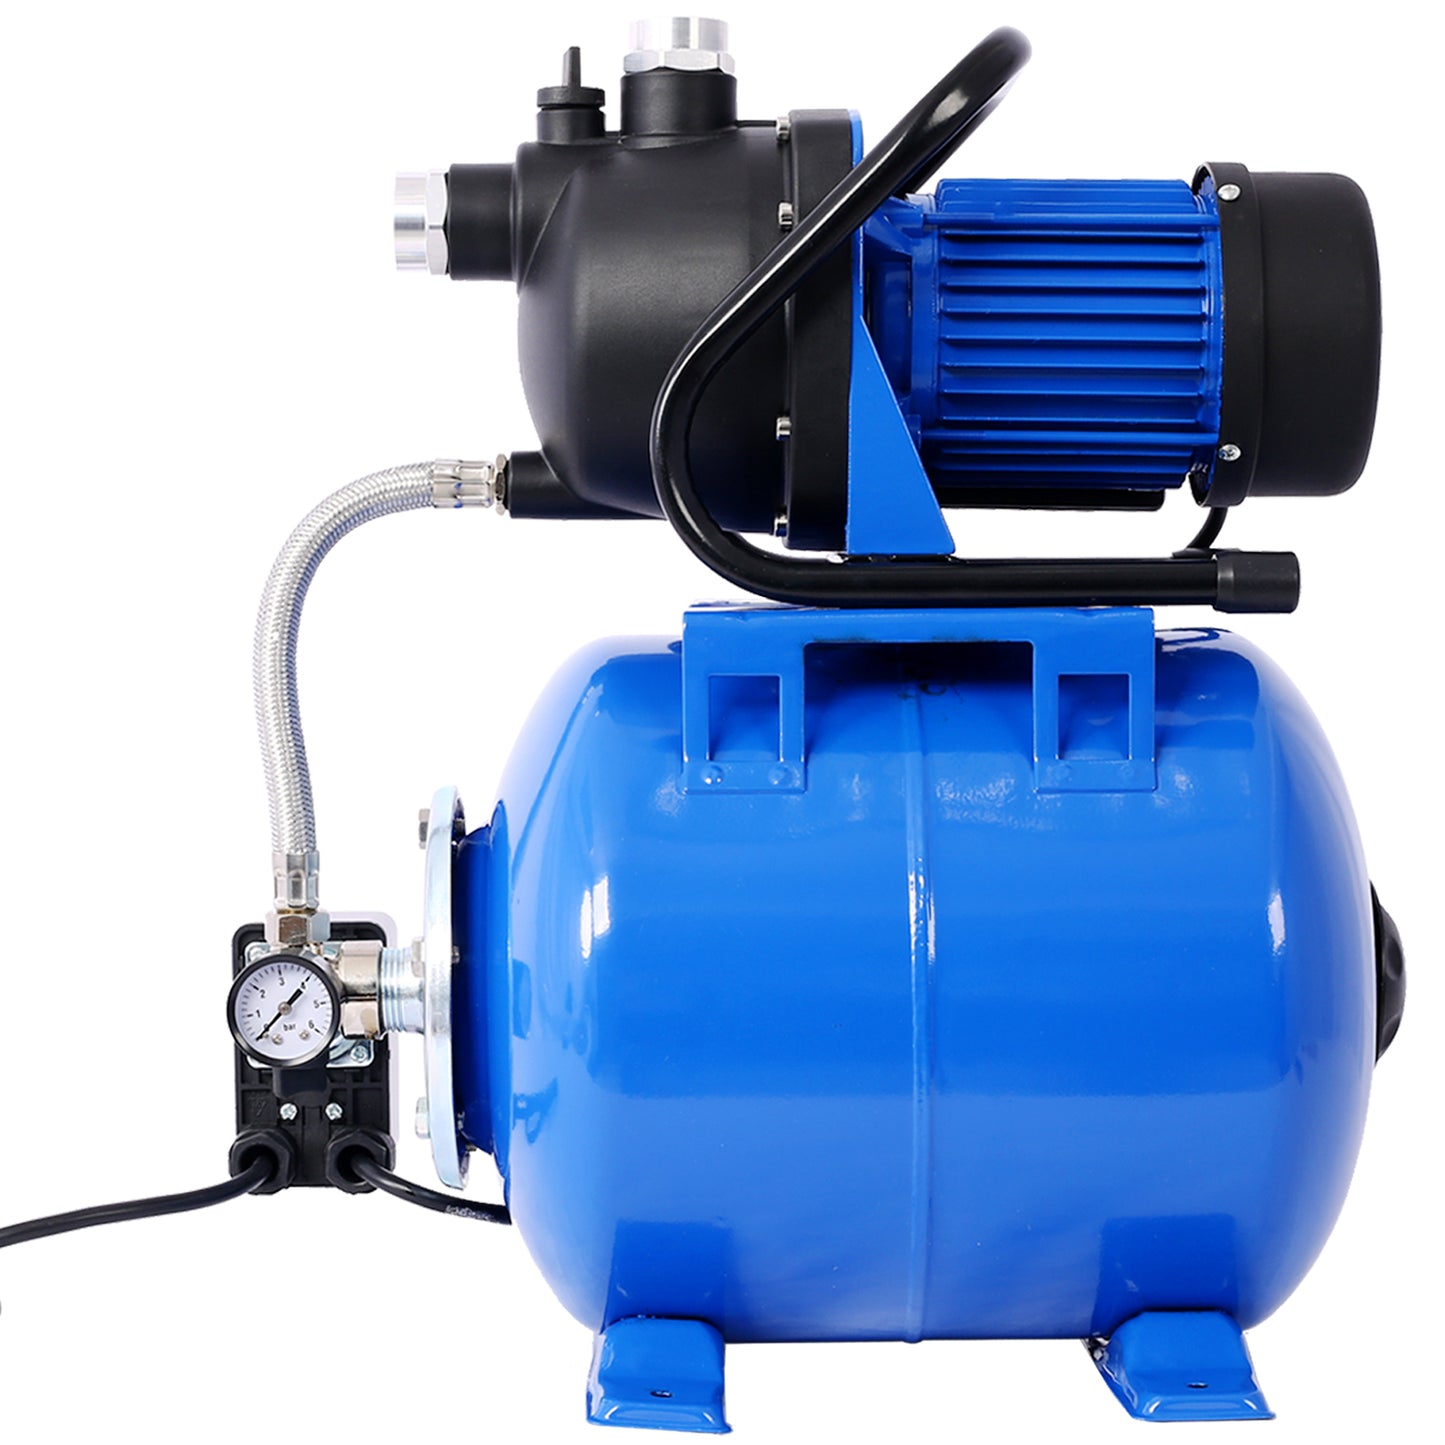 1.6HP Shallow Well Pump with Pressure Tank,garden water pump, Irrigation Pump,Automatic Water Booster Pump for Home Garden Lawn Farm